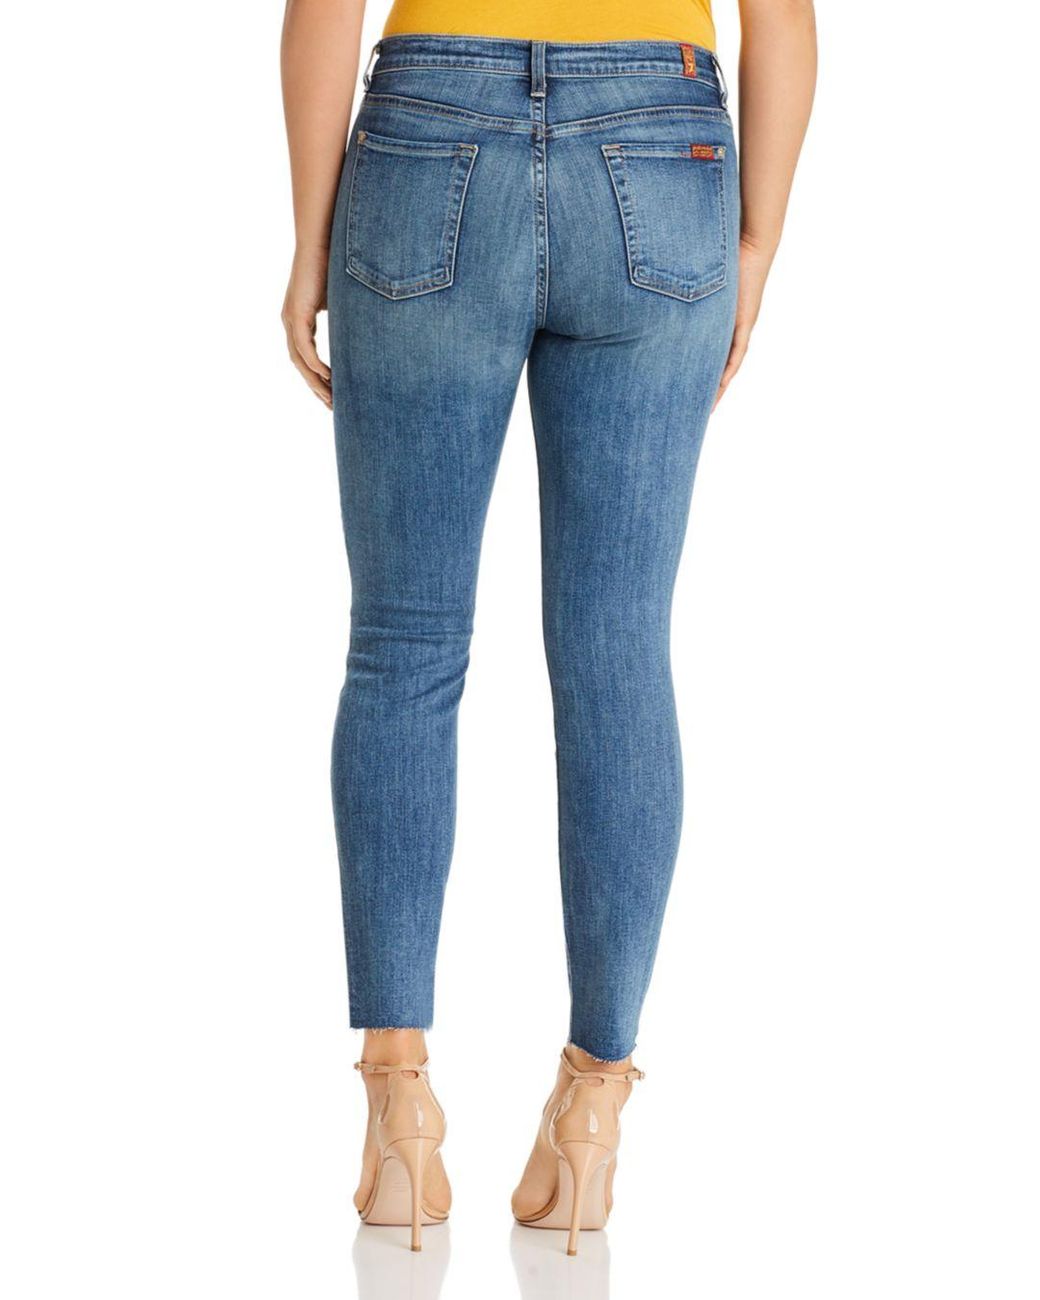 Authentic Fortune Jeans 7 For All Mankind Womens B air 